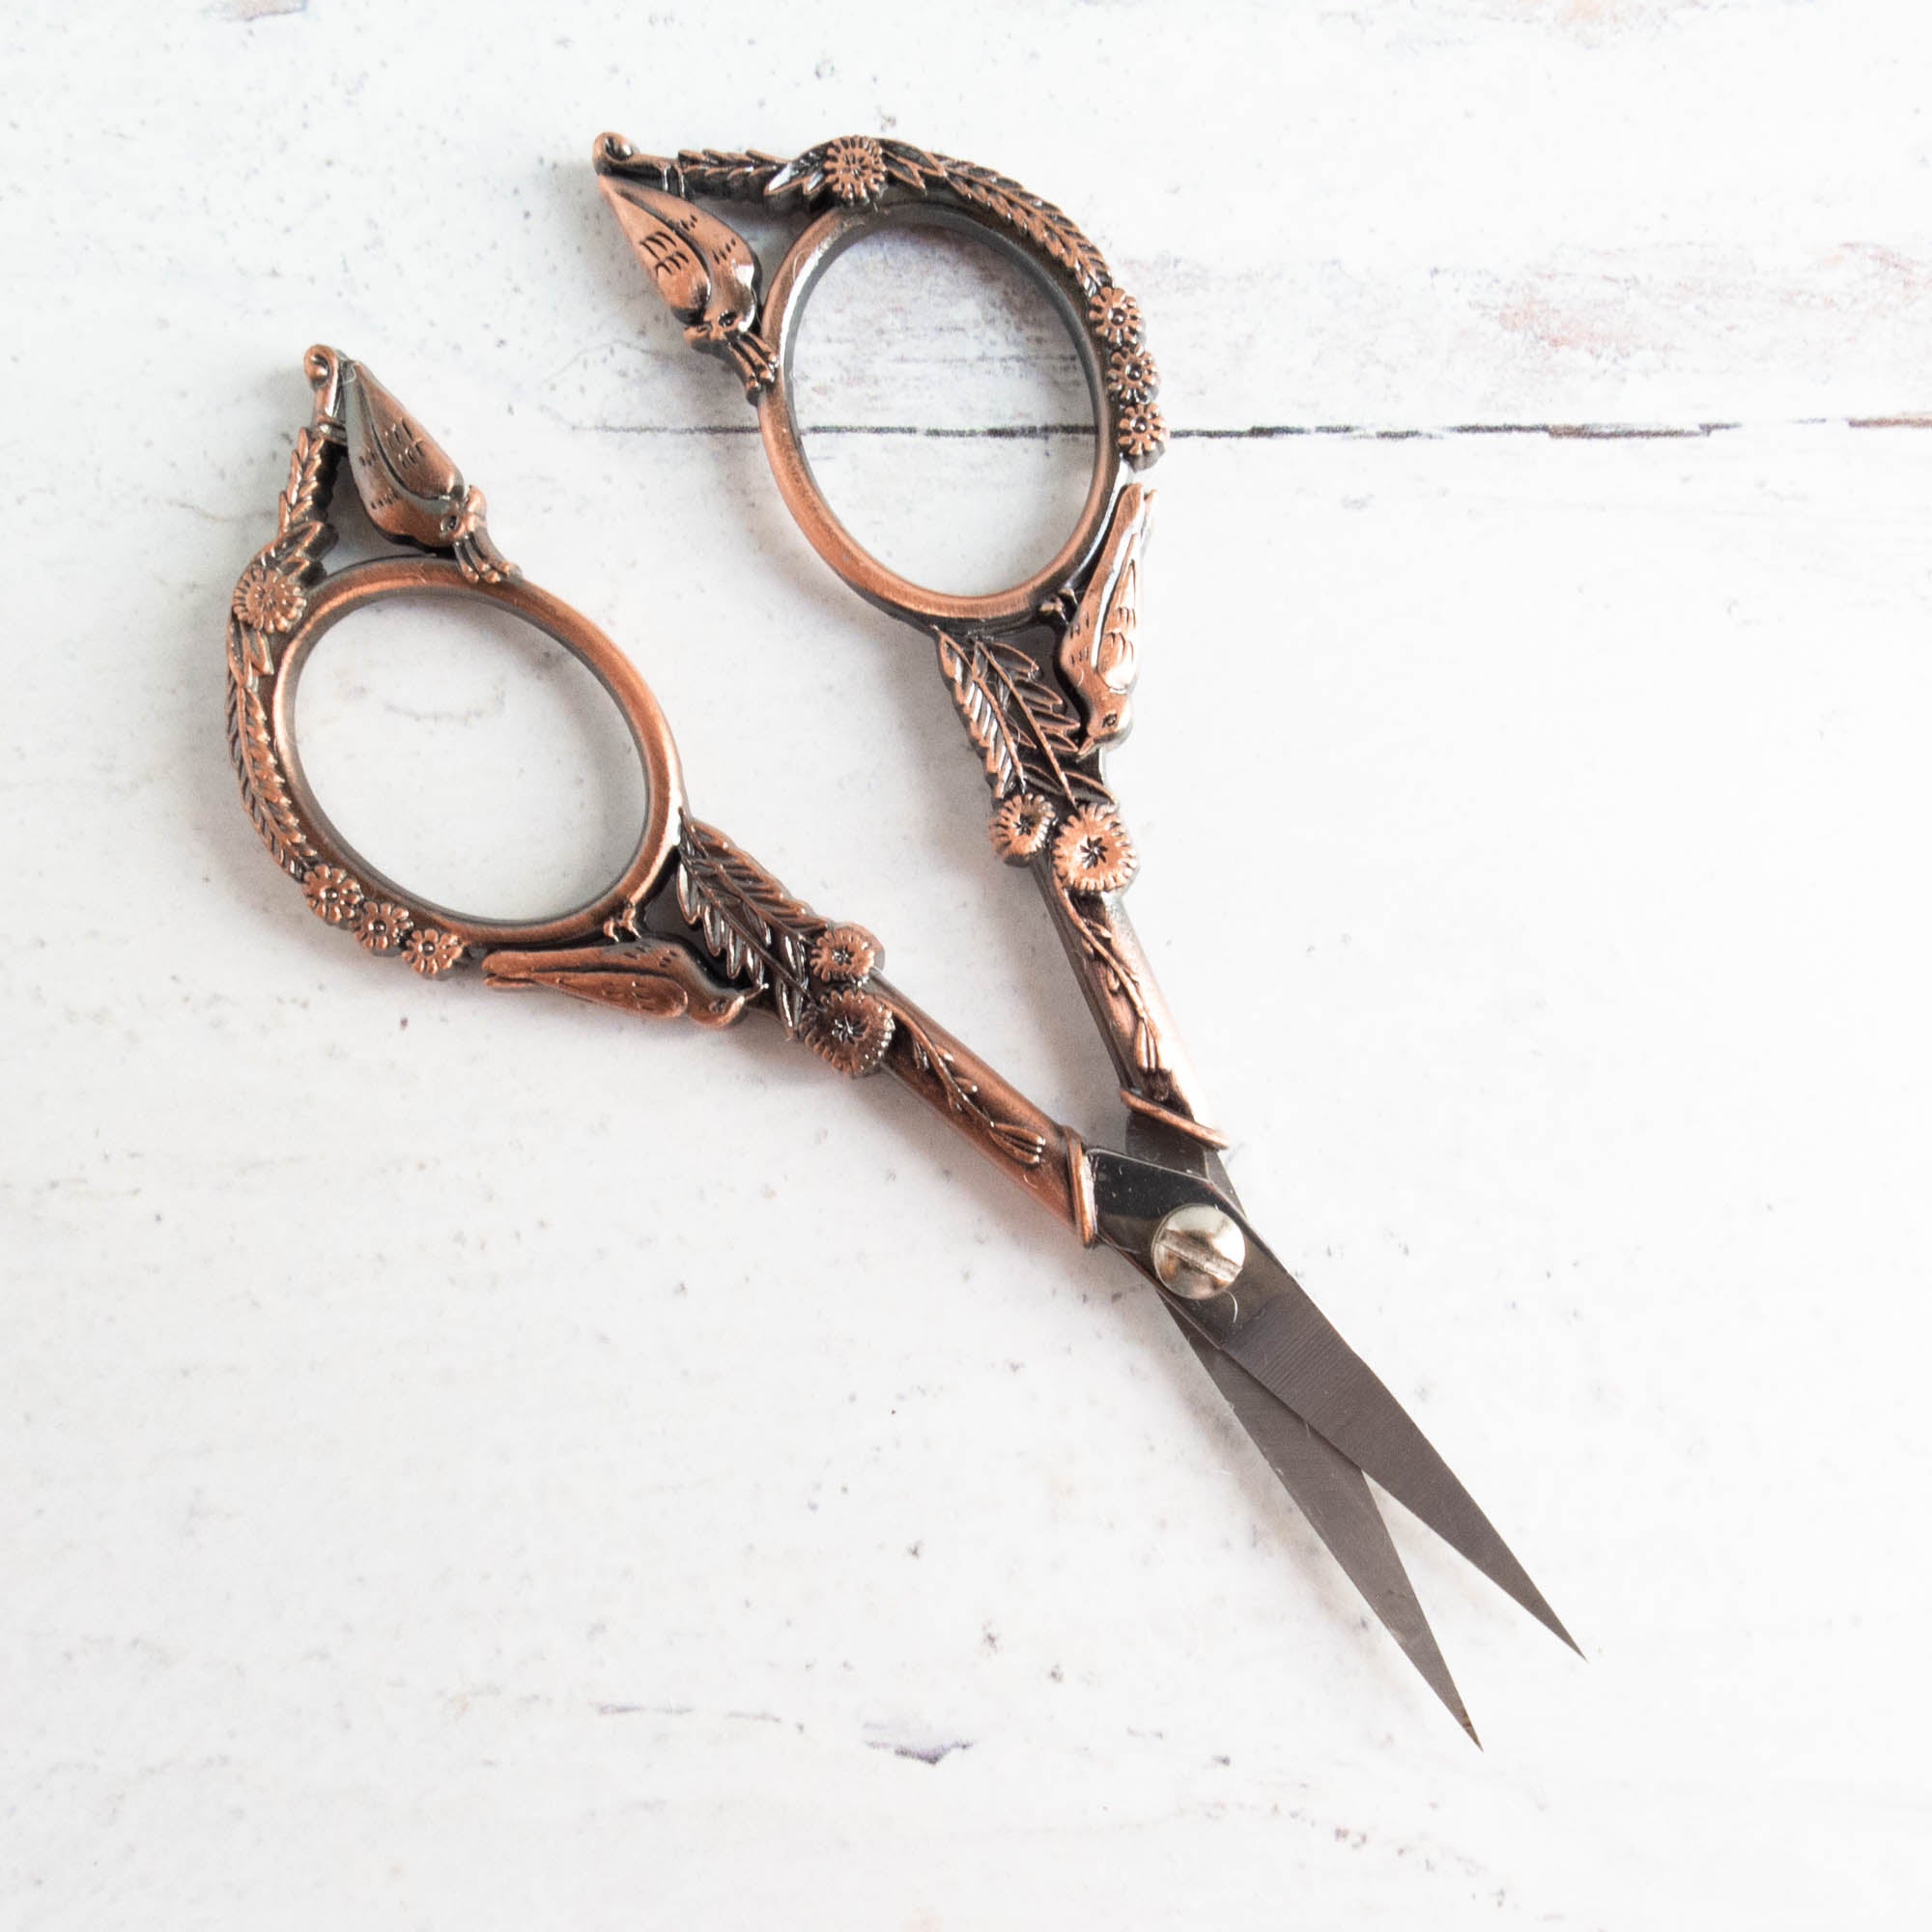 Feathered Friends Embroidery Scissors - Stitched Modern